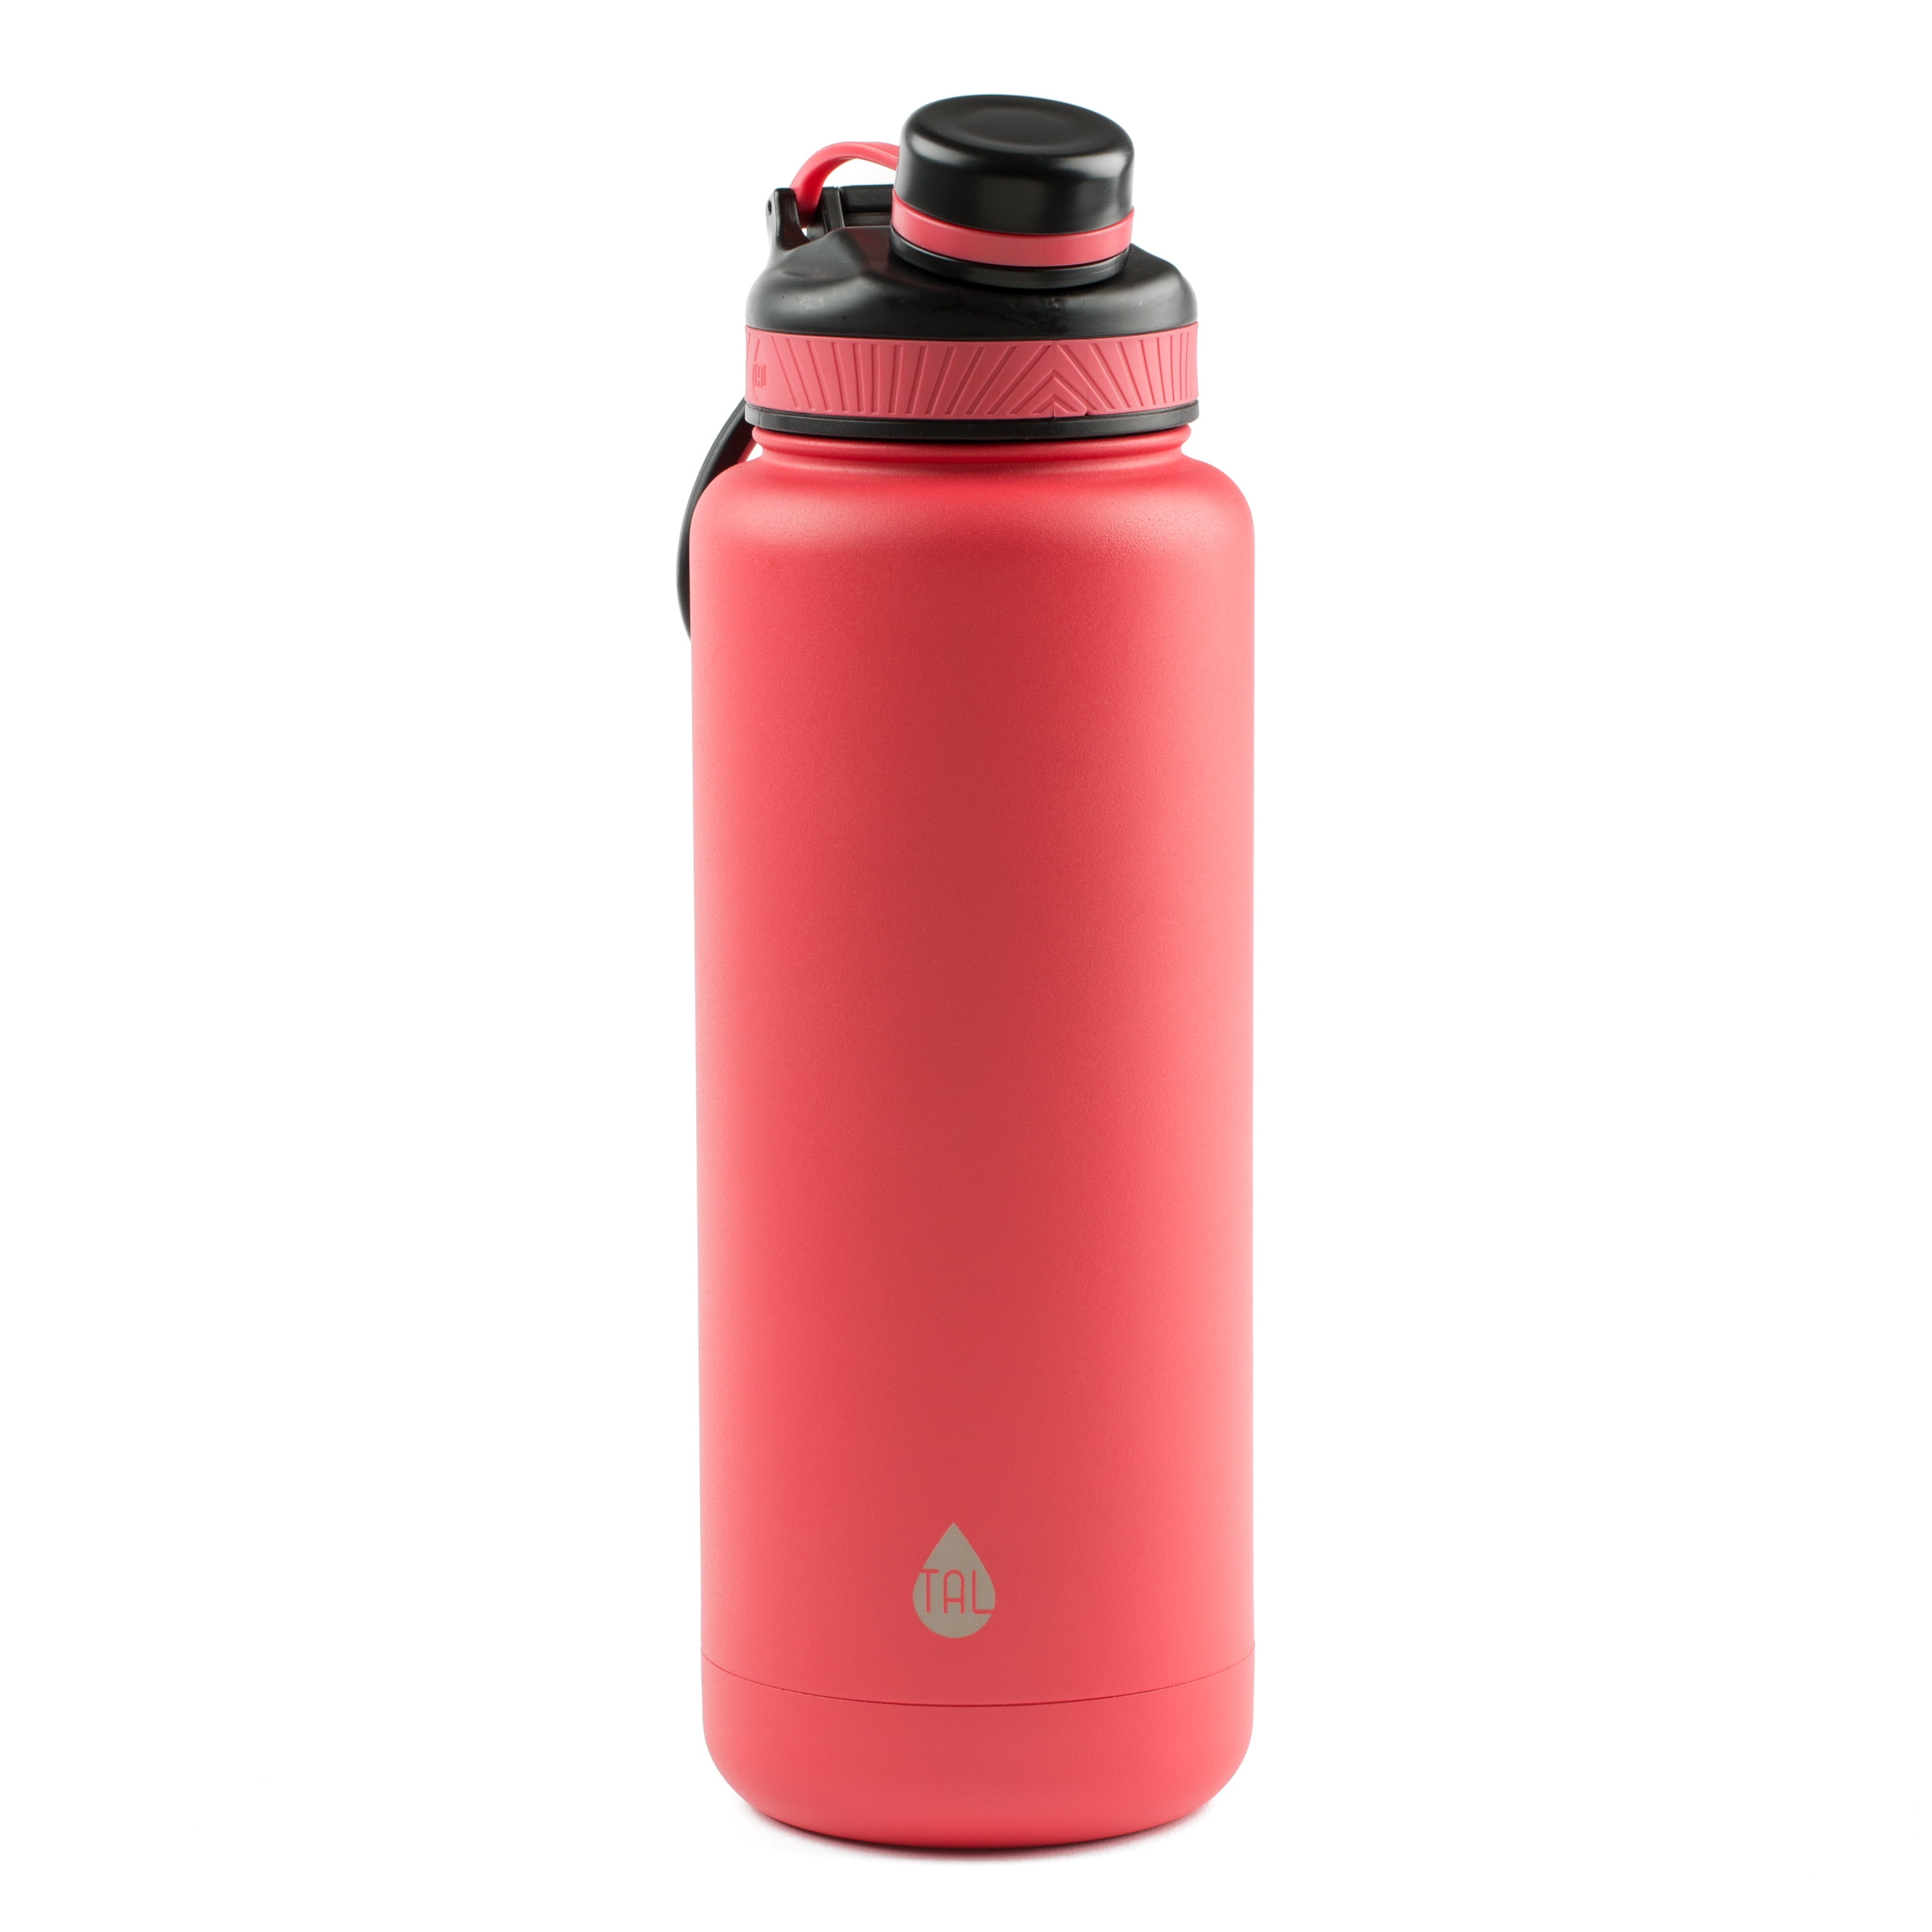 TAL Ranger Straw Lid Water Bottle Mint Green 26 oz Insulated Stainless  Steel